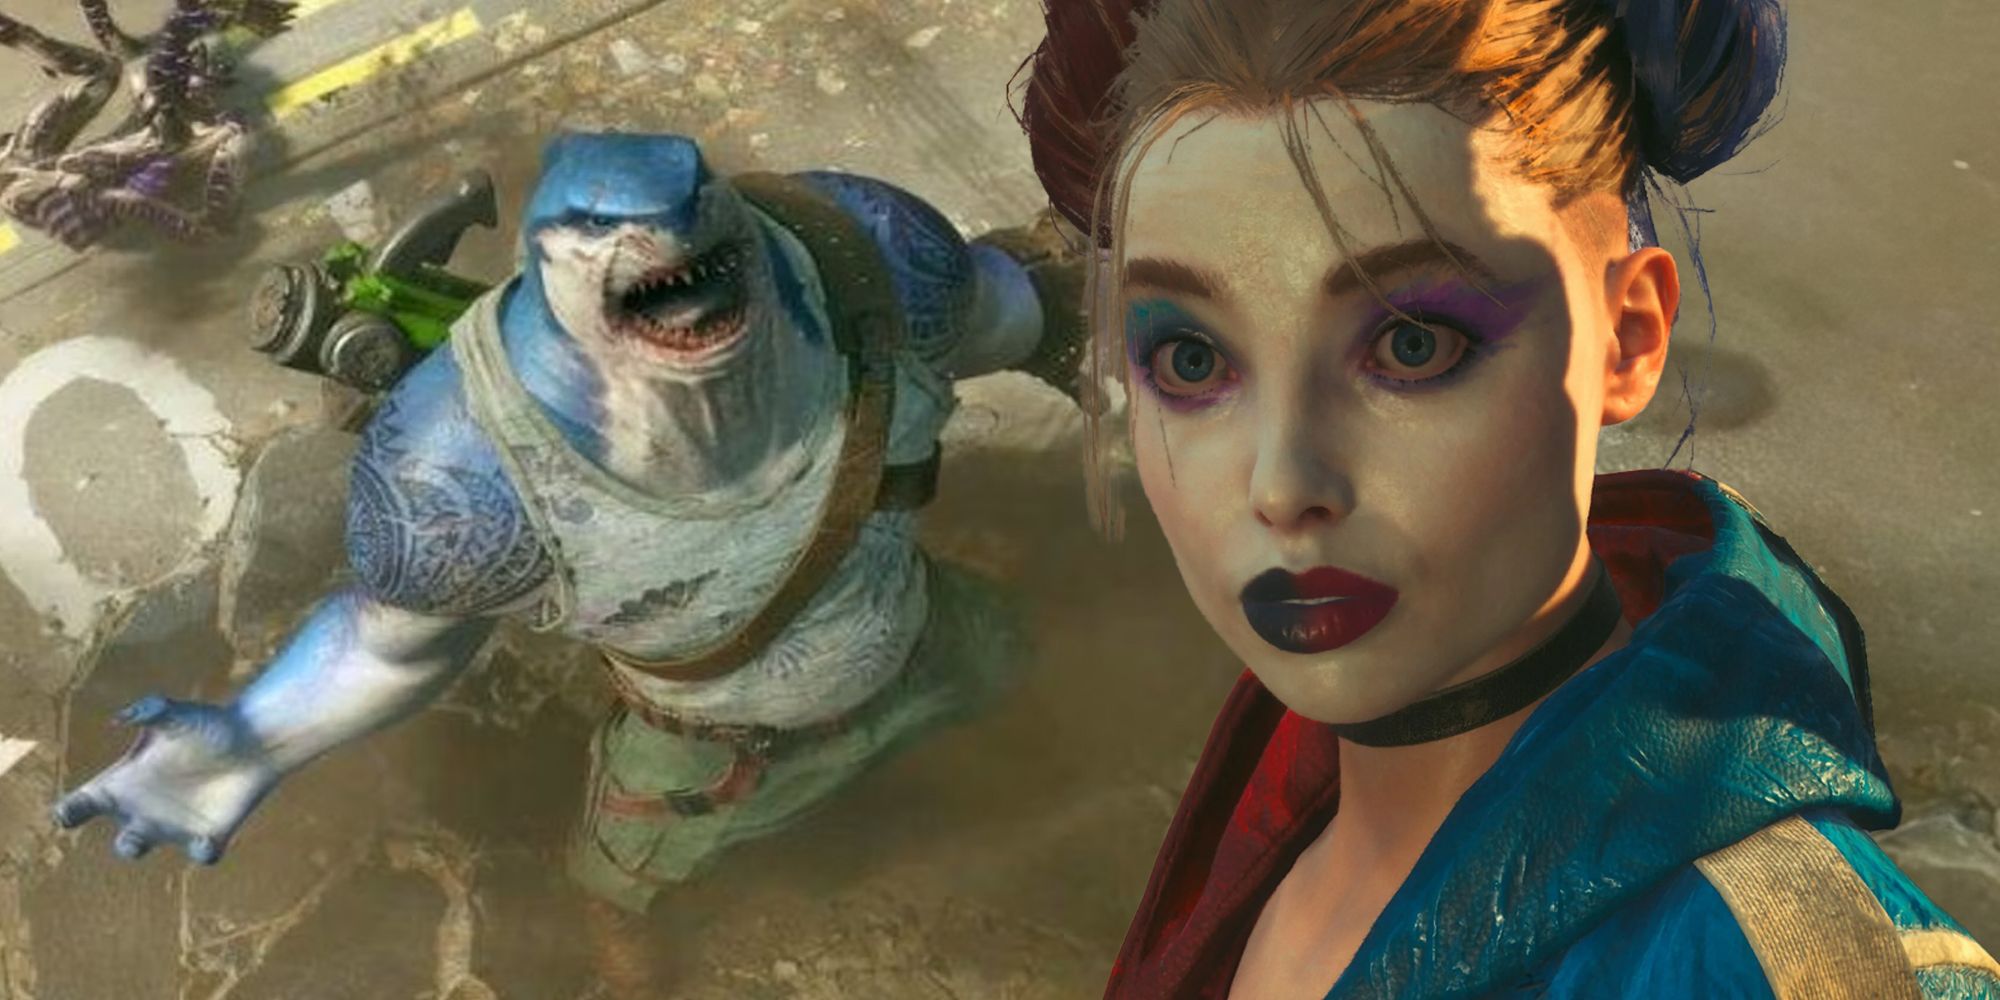 Harley Quinn looks shocked as King Shark roars with rage in the background, surrounded by bodies